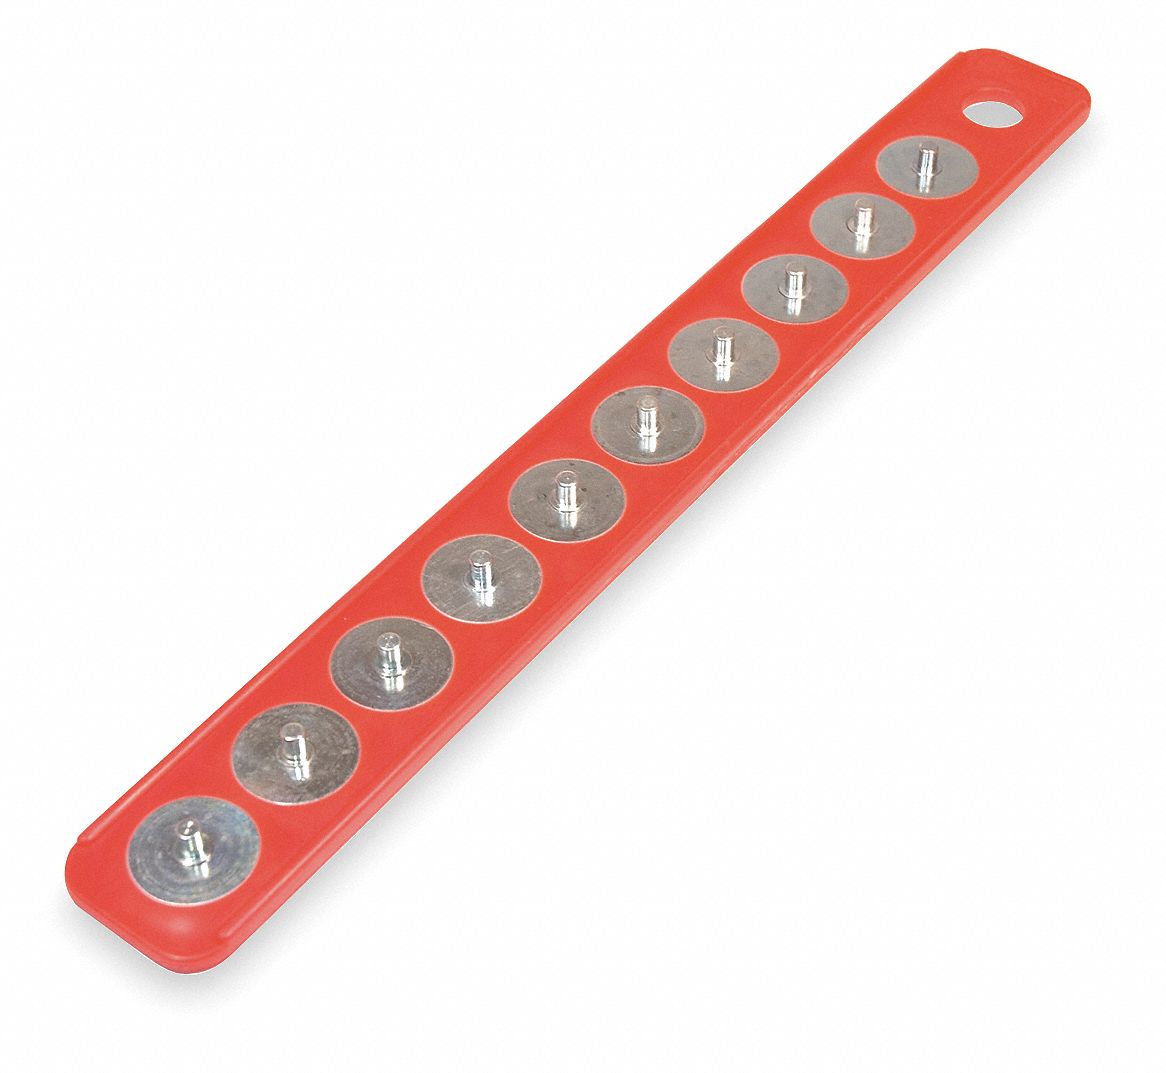 Socket Holder Strip: Red, 1 7/8 in Overall Wd, 16 5/8 in Overall Ht, 10 Posts/Slots, Plastic